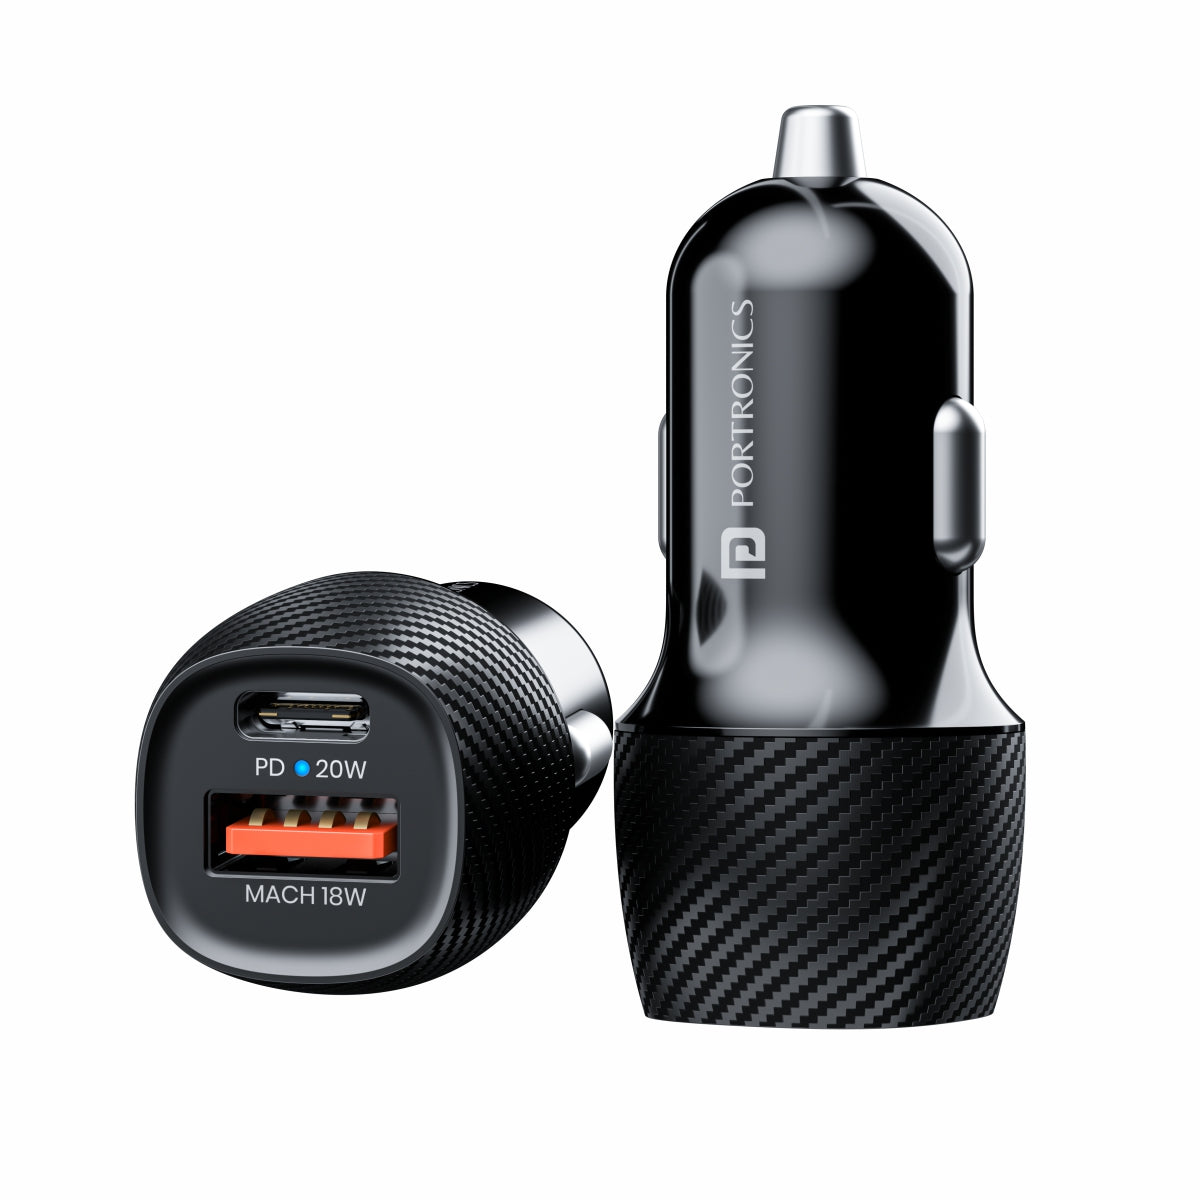 Portronics 20W Car Power 17 Car Charger Adapter with Dual Output (20W PD Type C Port + 18W USB A Mach 3.0 Port),Black